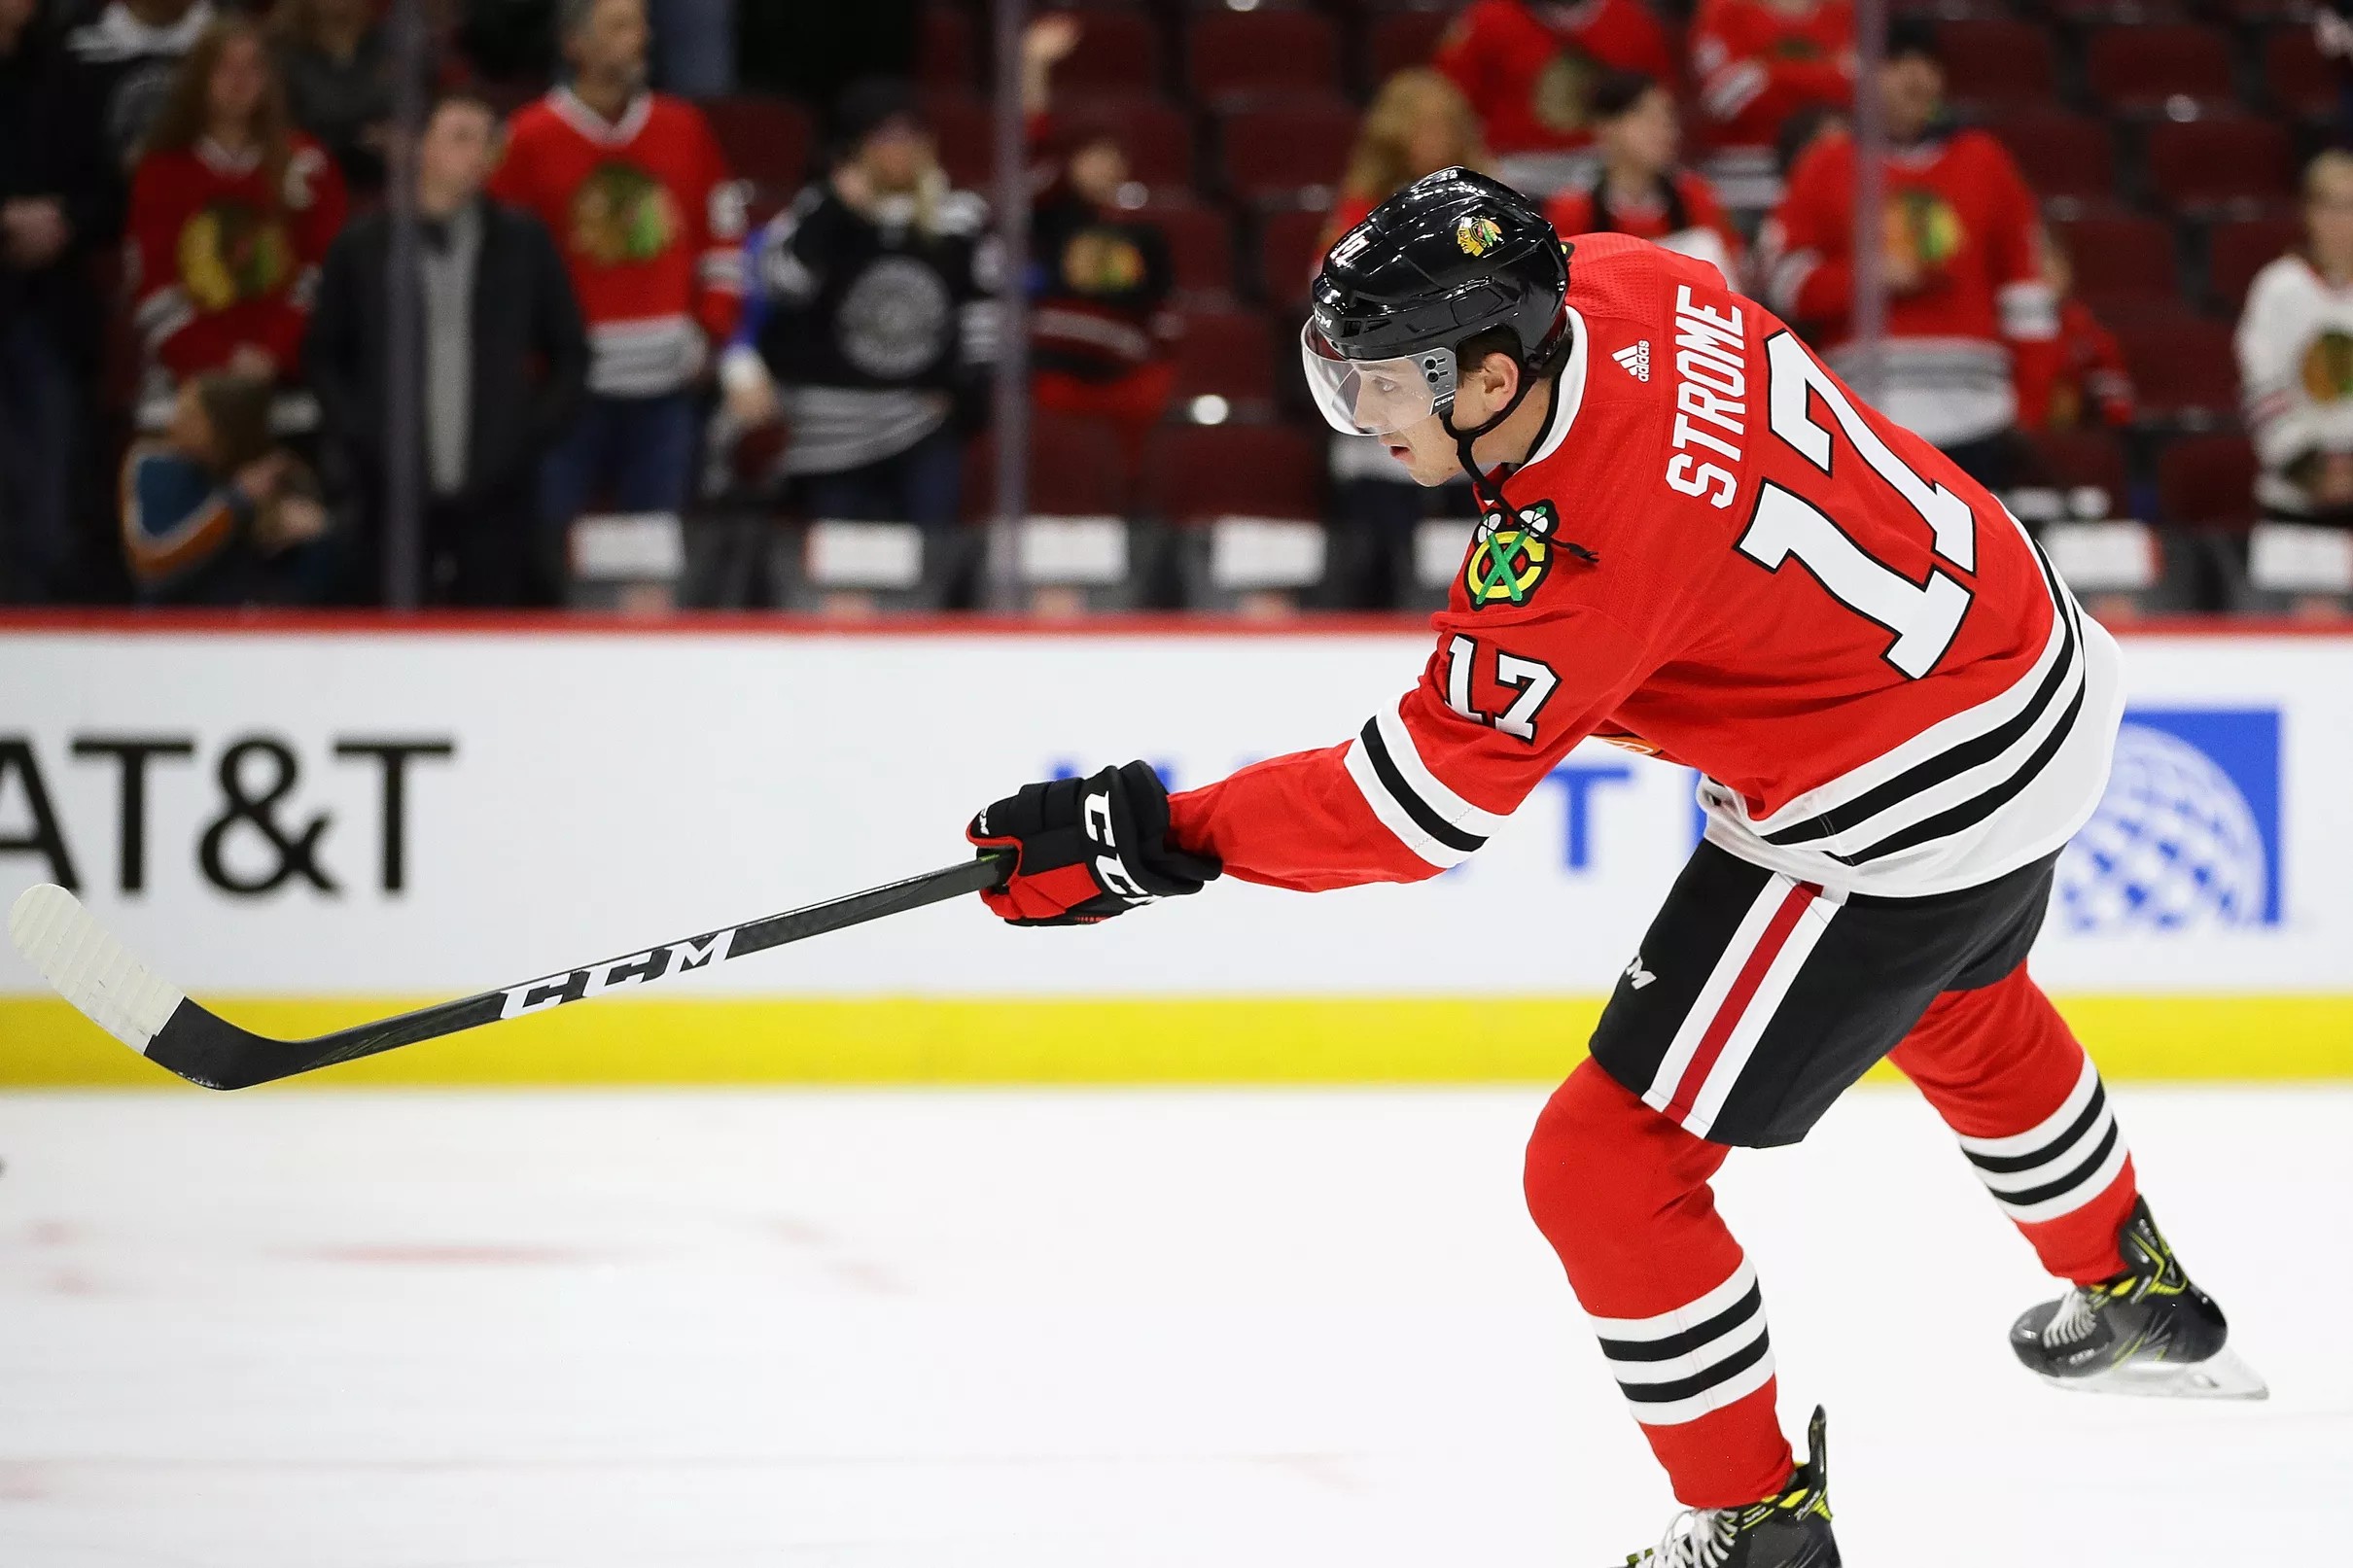 Watch: Dylan Strome scores his first goal for Blackhawks